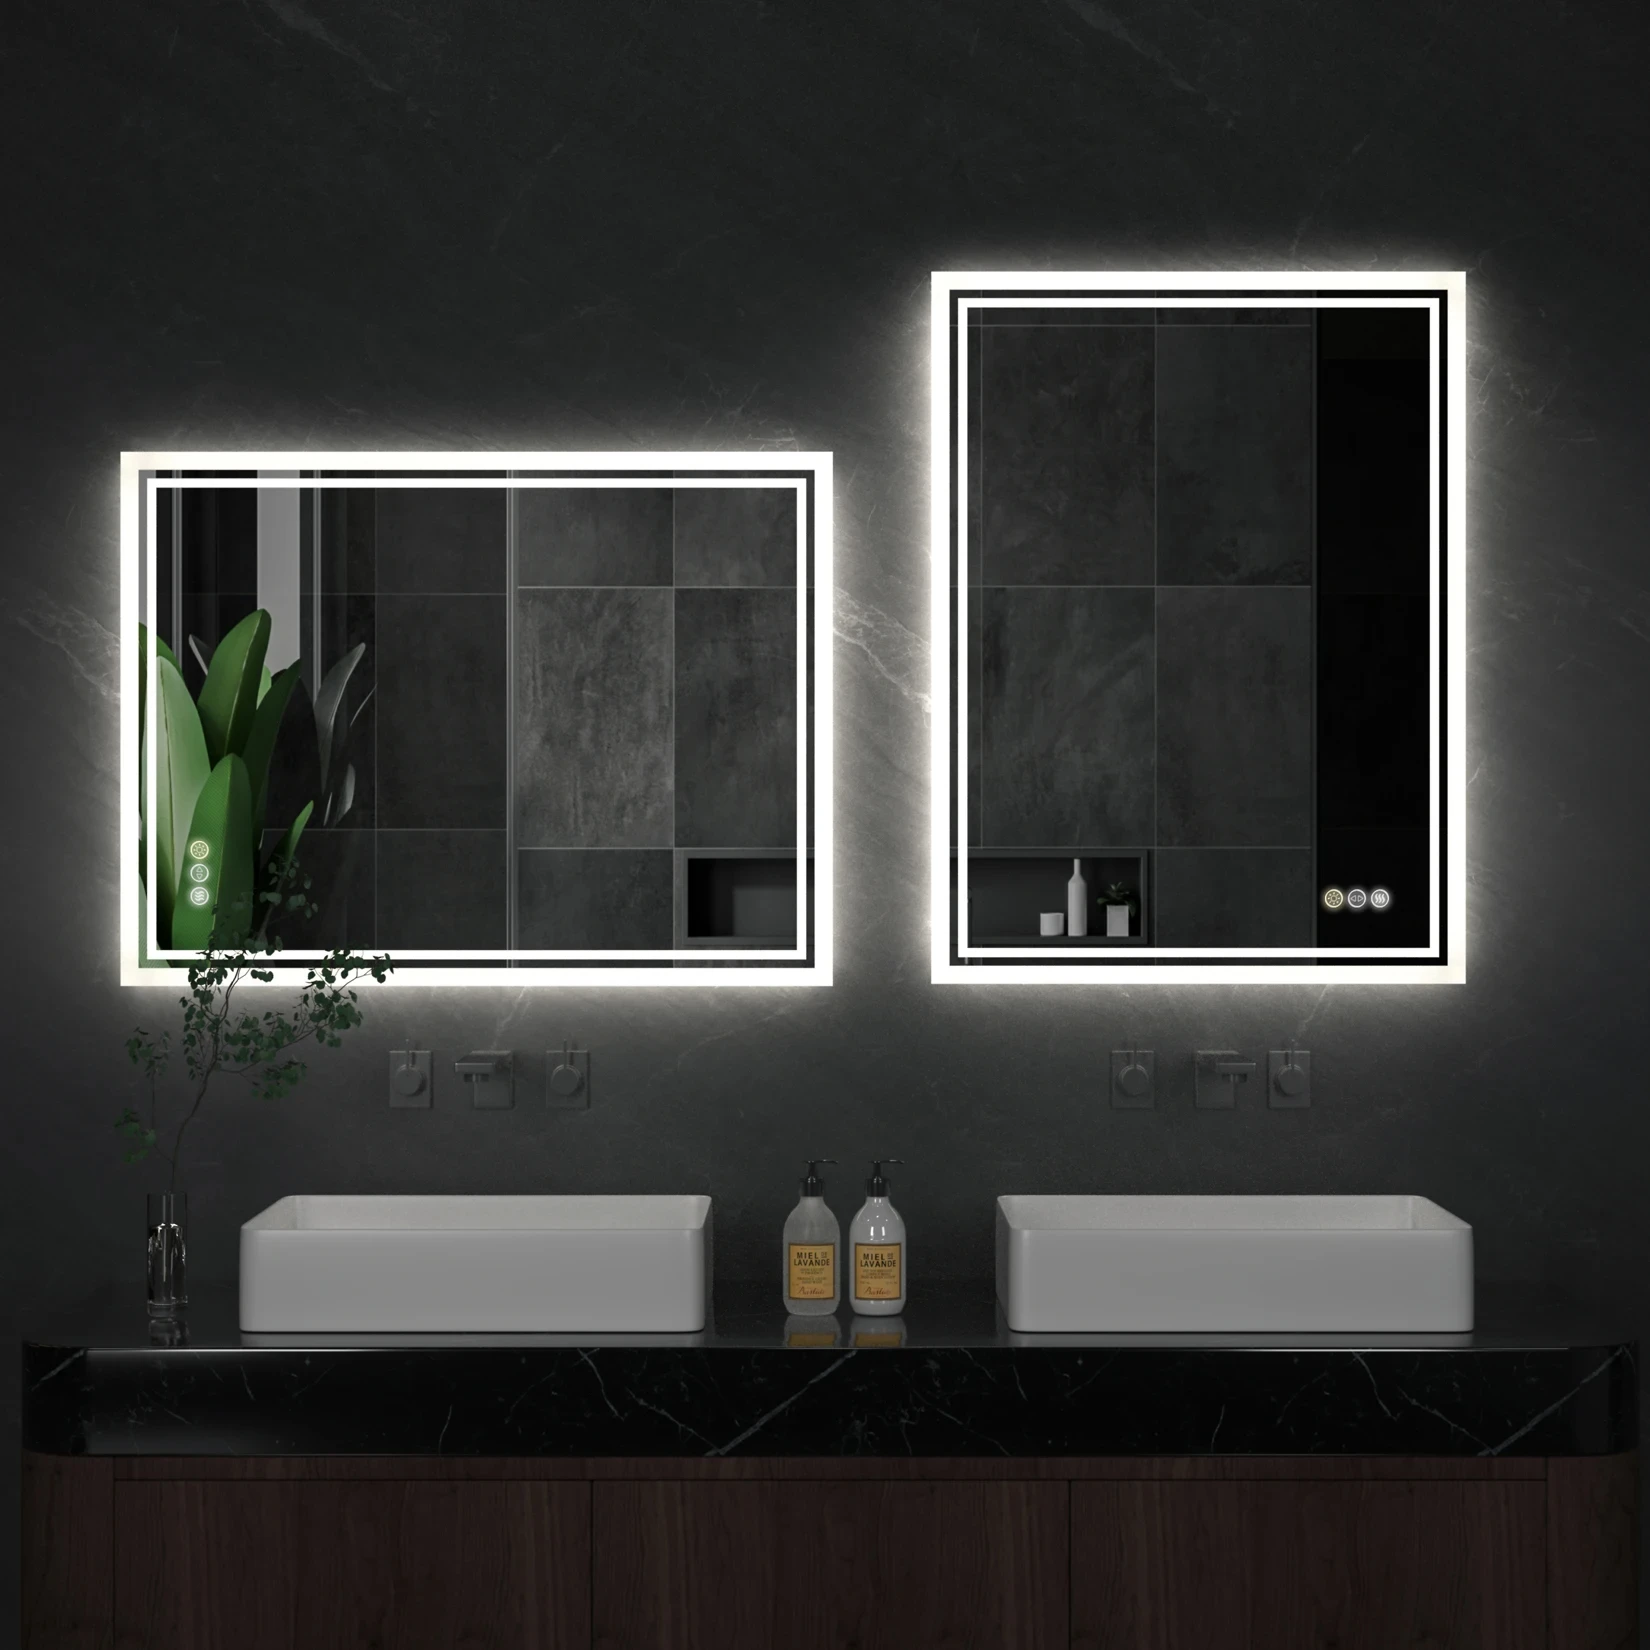 

LED Backlit Mirror Bathroom Vanity with Lights,Anti-Fog,Dimmable,CRI90+,Touch Button,Water Proof,Horizontal/Vertical YX033WY